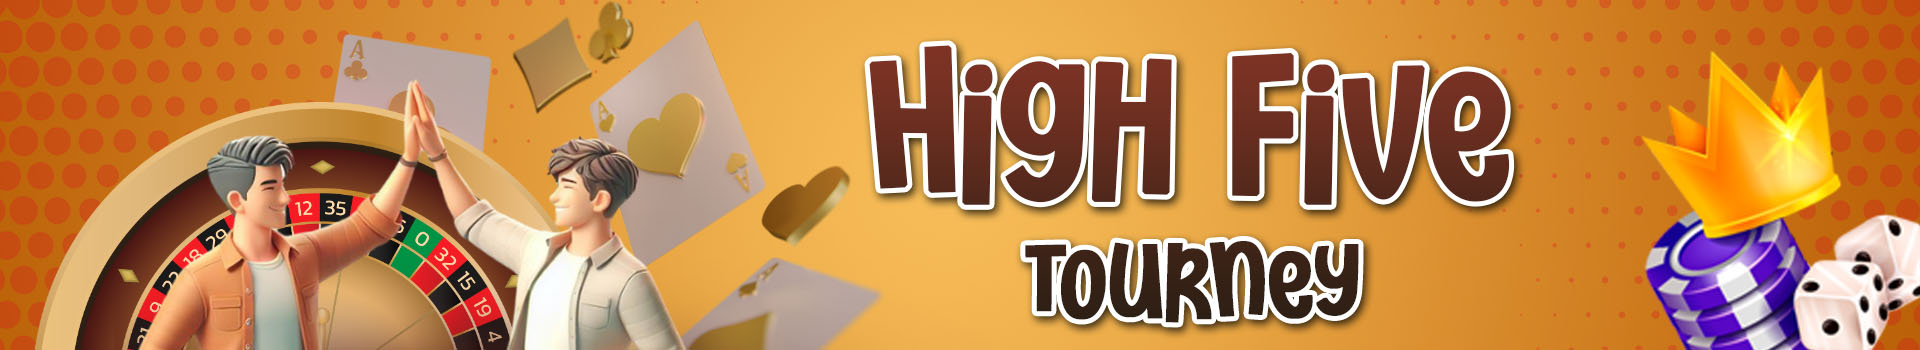 High Five Tourney banner